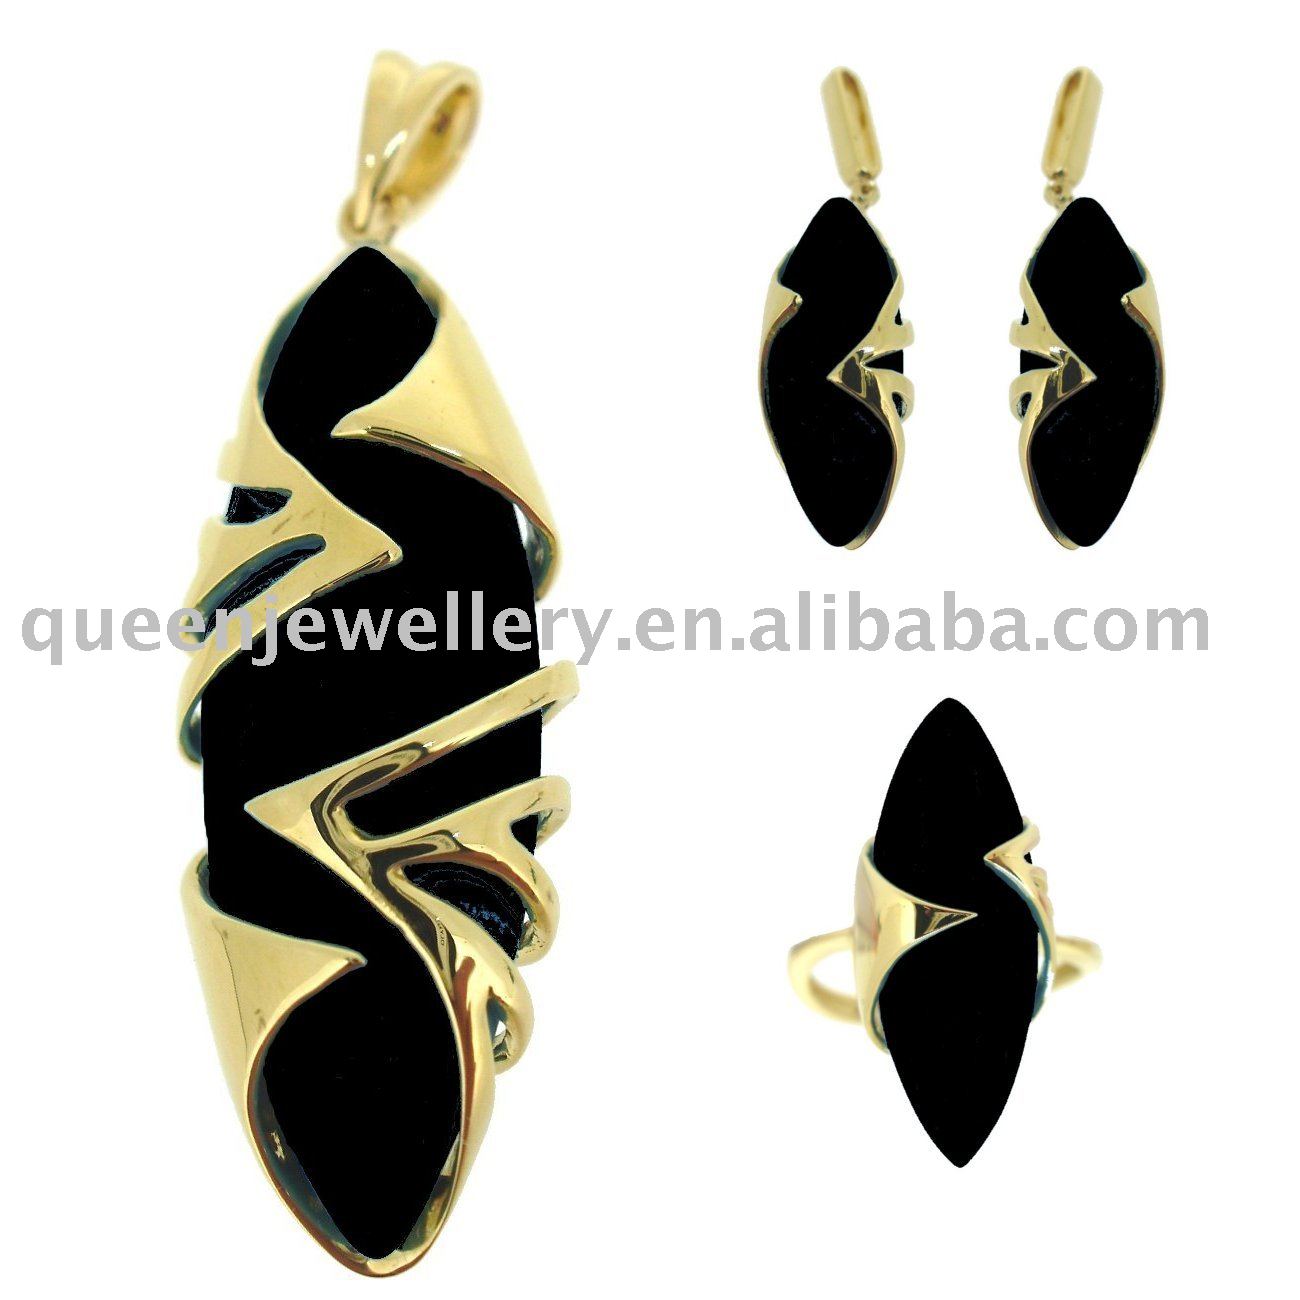 Buy gold jewelry kgold